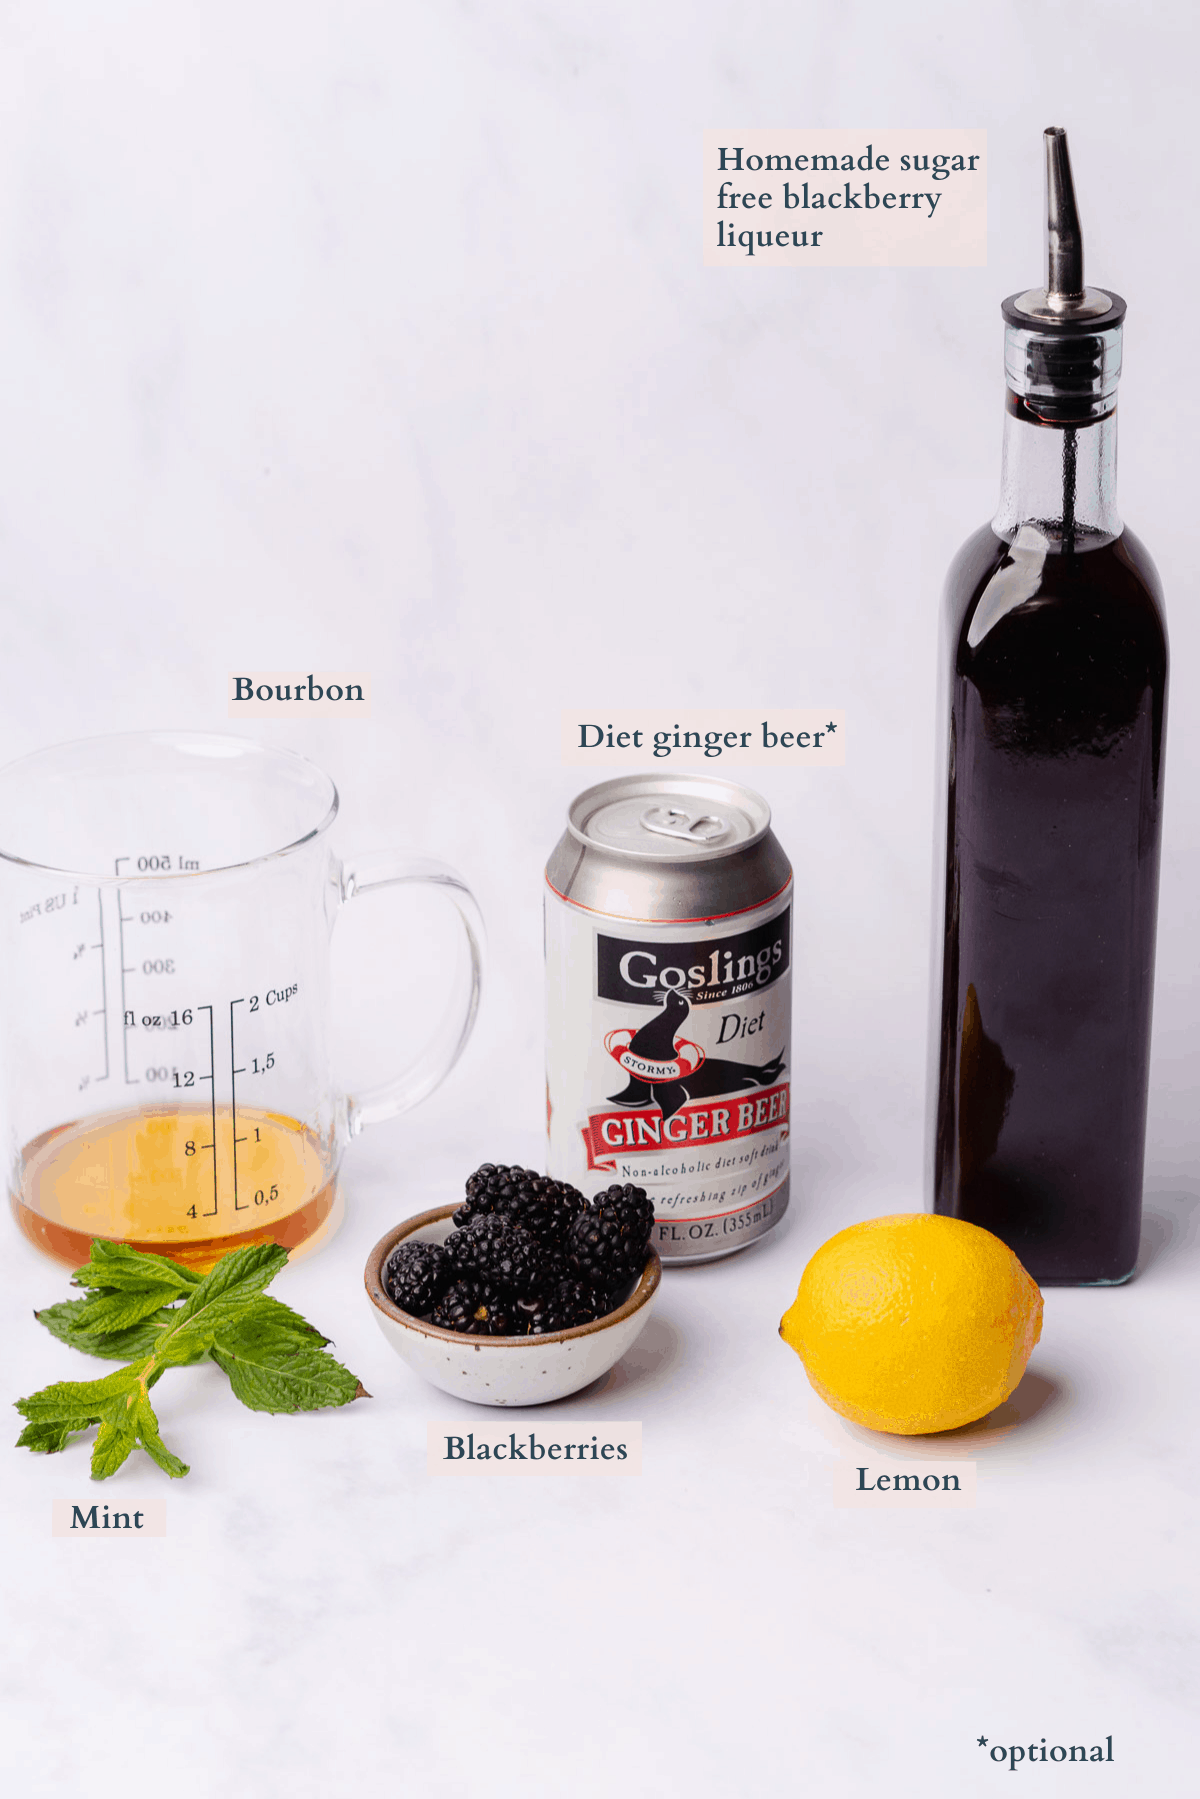 blackberry bourbon bramble ingredients graphic with text to denote different ingredients